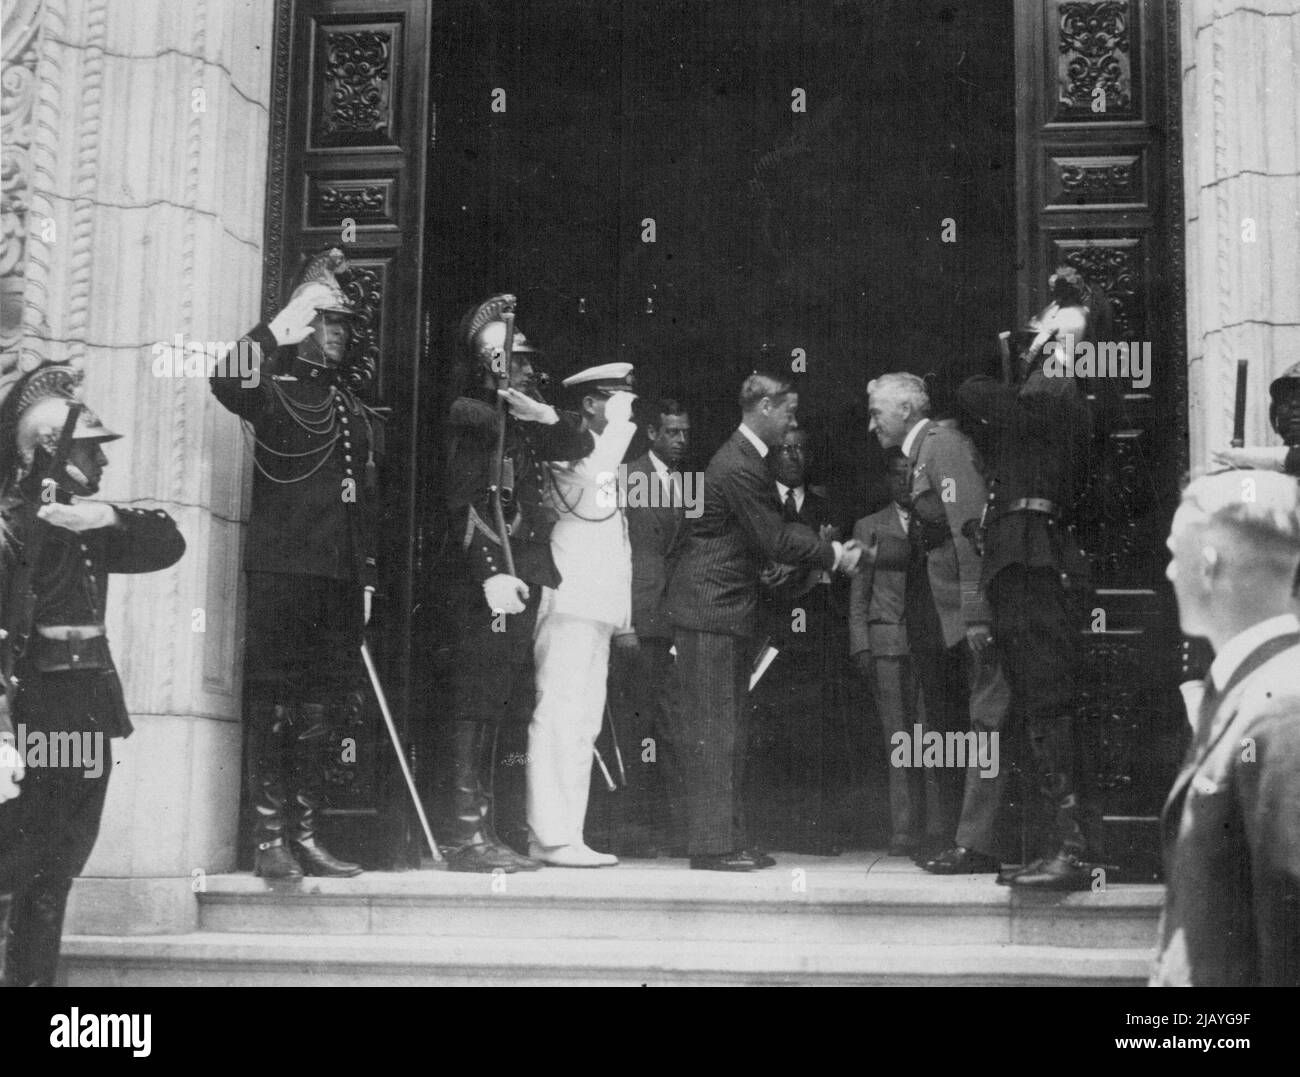 The Princes at Lima: The Prince of Wales and Prince George leaving the Presidential Palace at Lima, Peru, after their visit to the Provisional President, who conferred on the Princes the Order of the sun. April 15, 1931. Stock Photo